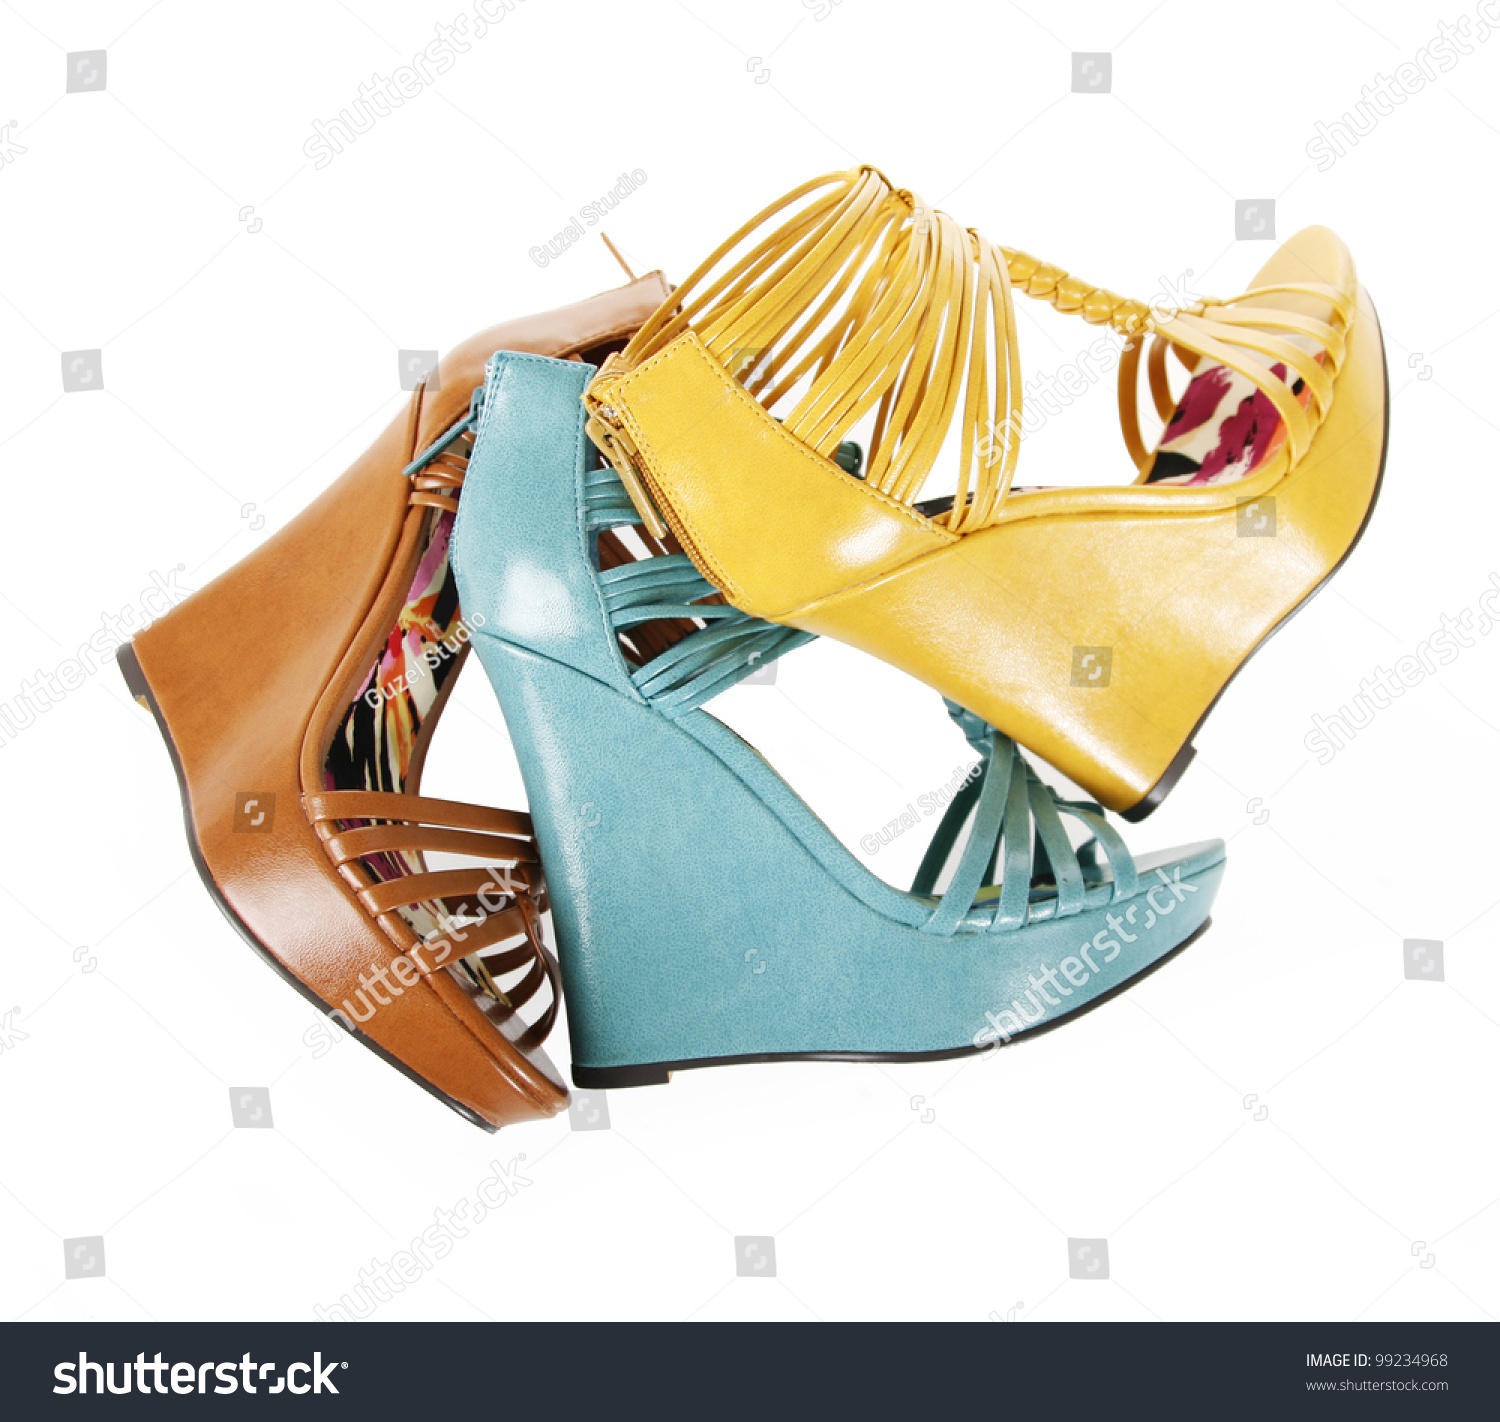 Wedges Shoes Collection Isolated On White Stock Photo 99234968